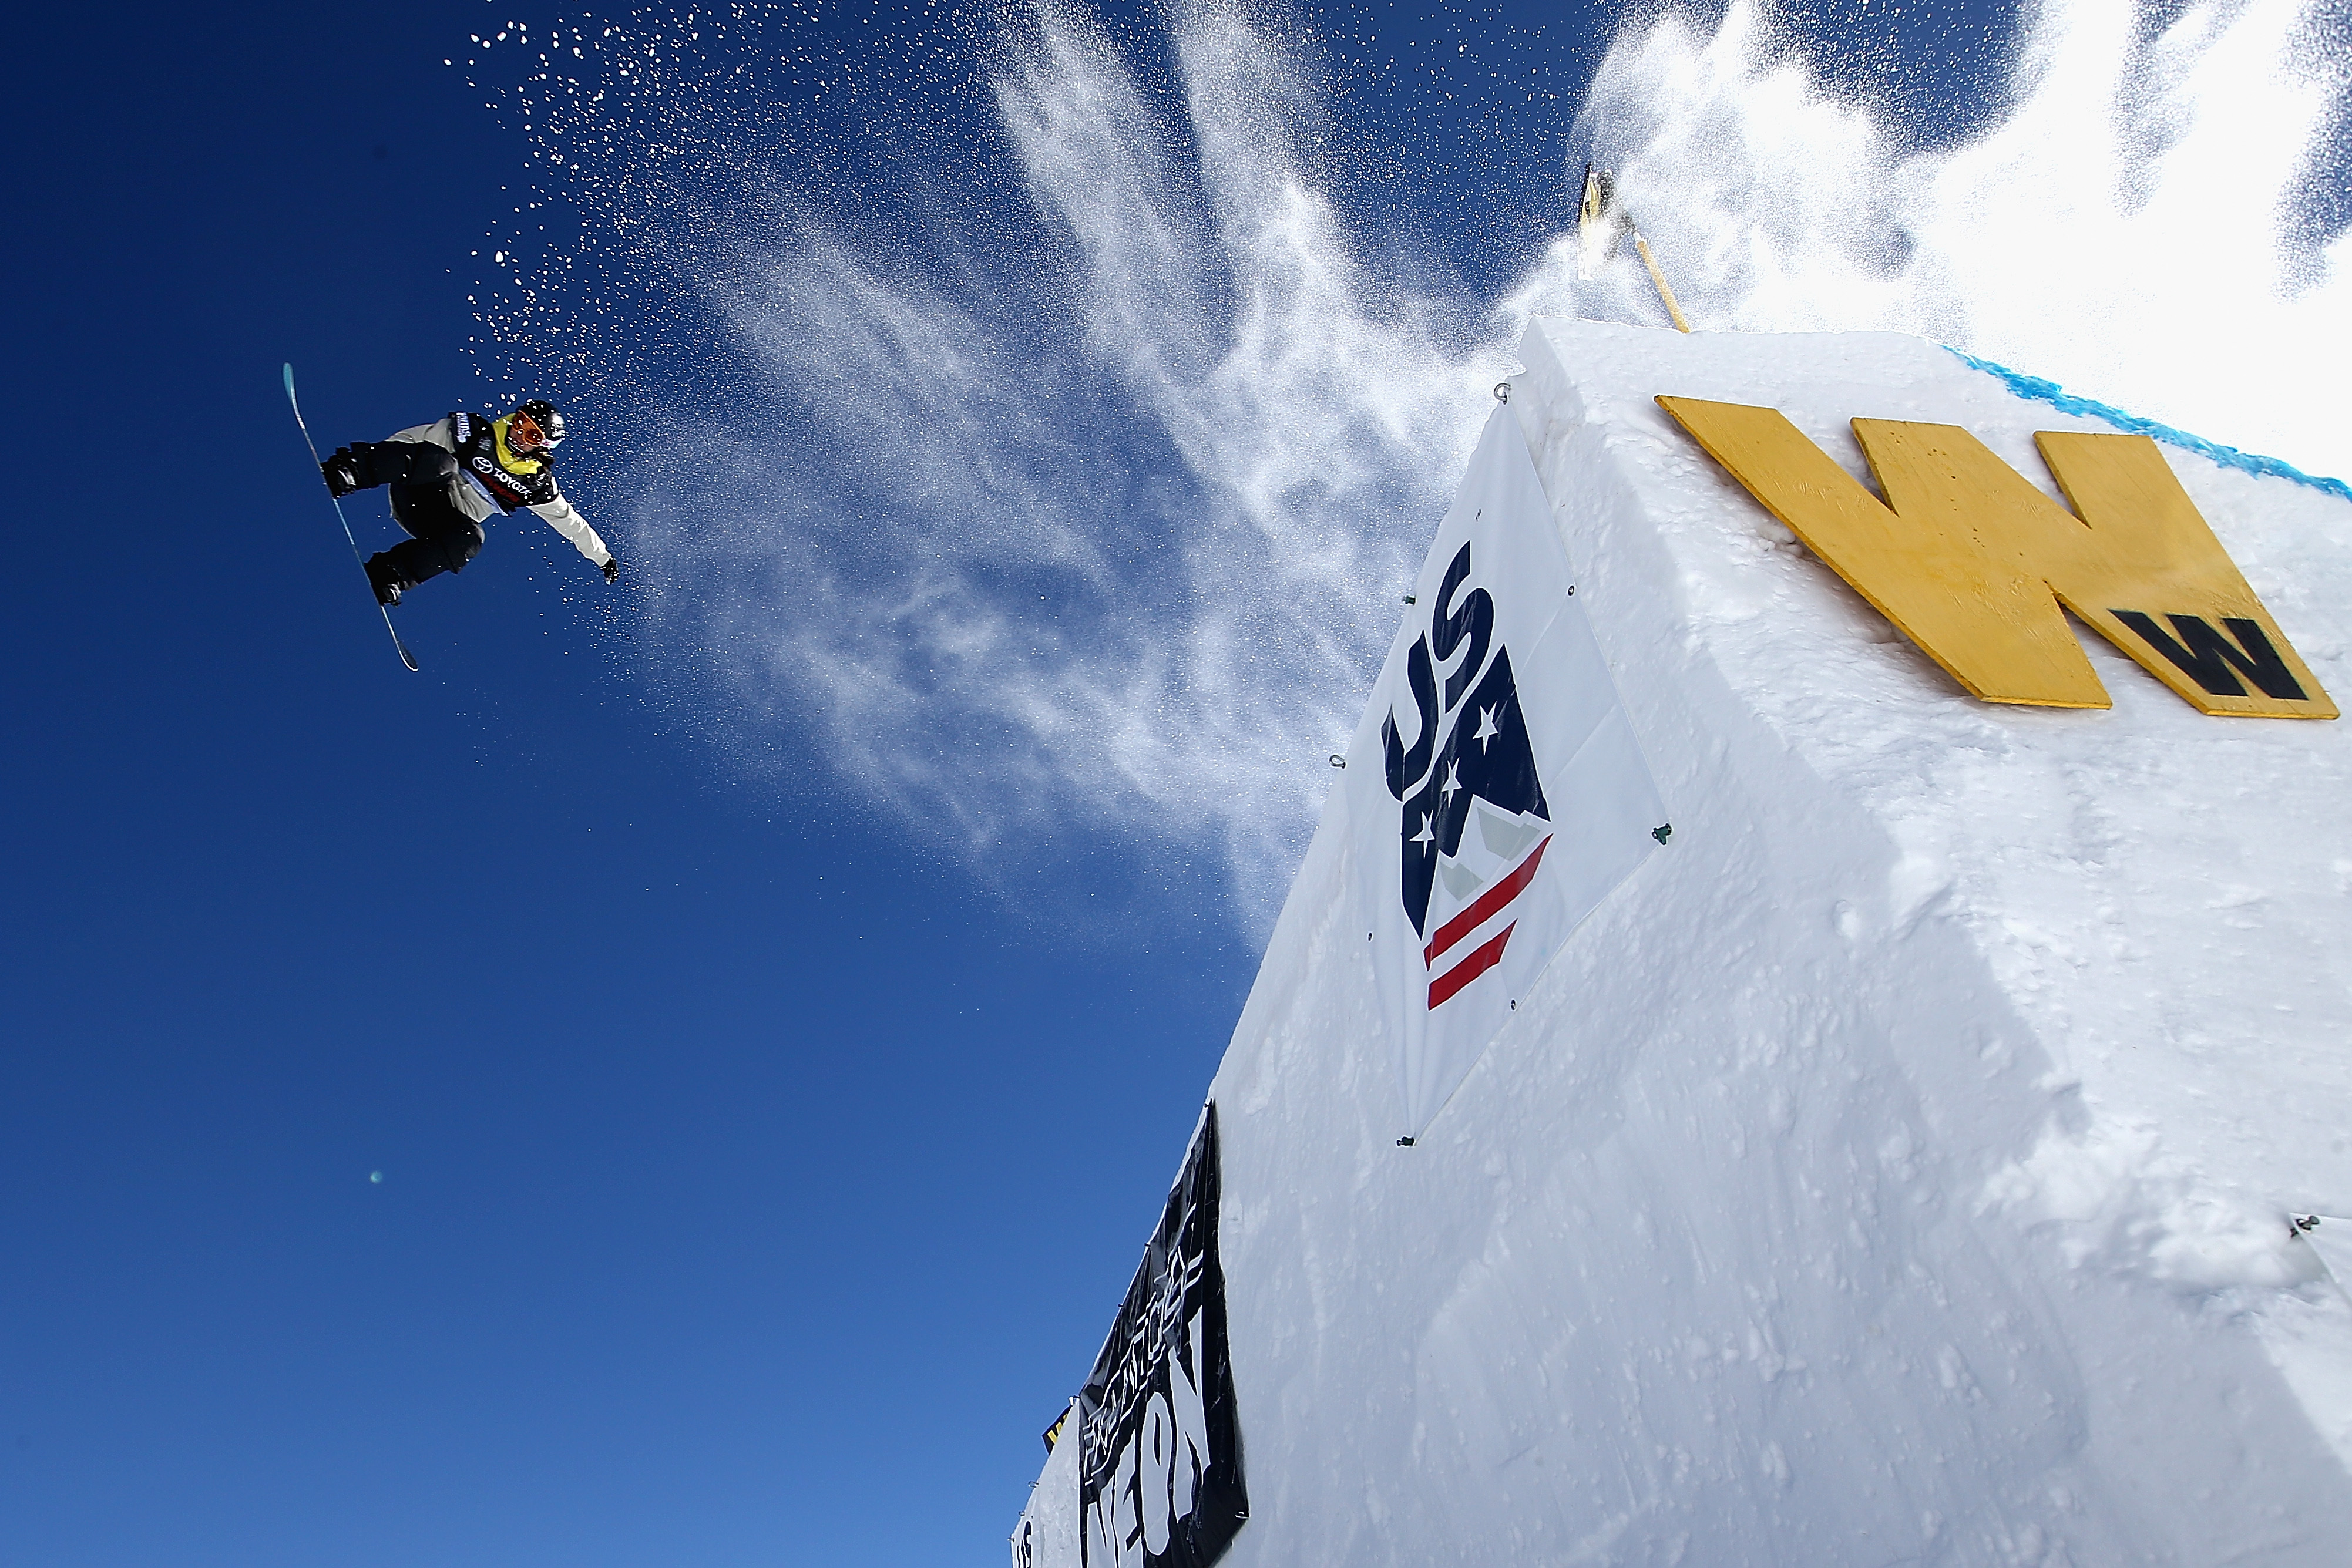 Sina Candrian of Switzerland competes in the final of the FIS Snowboard World Cup 2018 Ladies' Big Air during the Toyota U.S. Grand Prix on December 10, 2017 in Copper Mountain, Colorado. Sean M. Haffey—Getty Images (Sean M. Haffey—Getty Images)